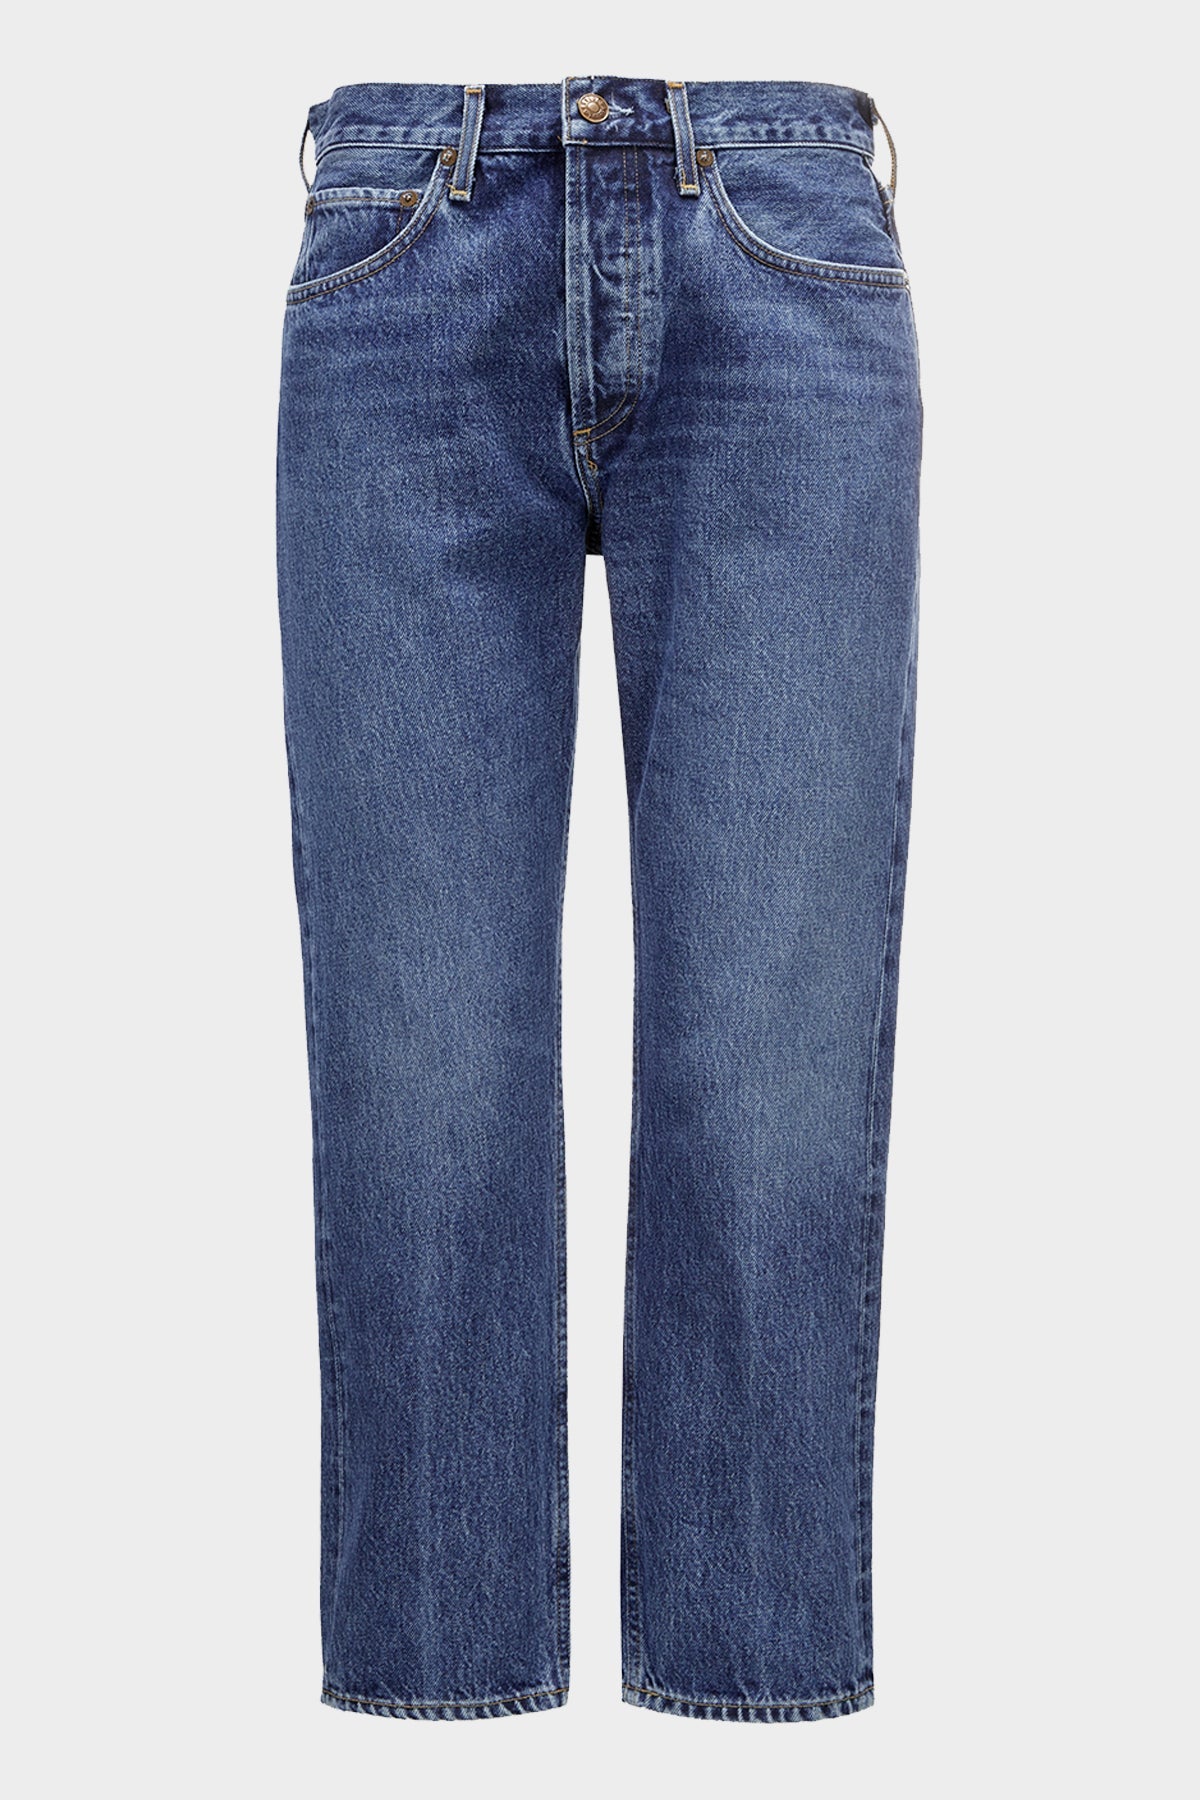 Parker Easy Straight Jean in Placebo - shop-olivia.com